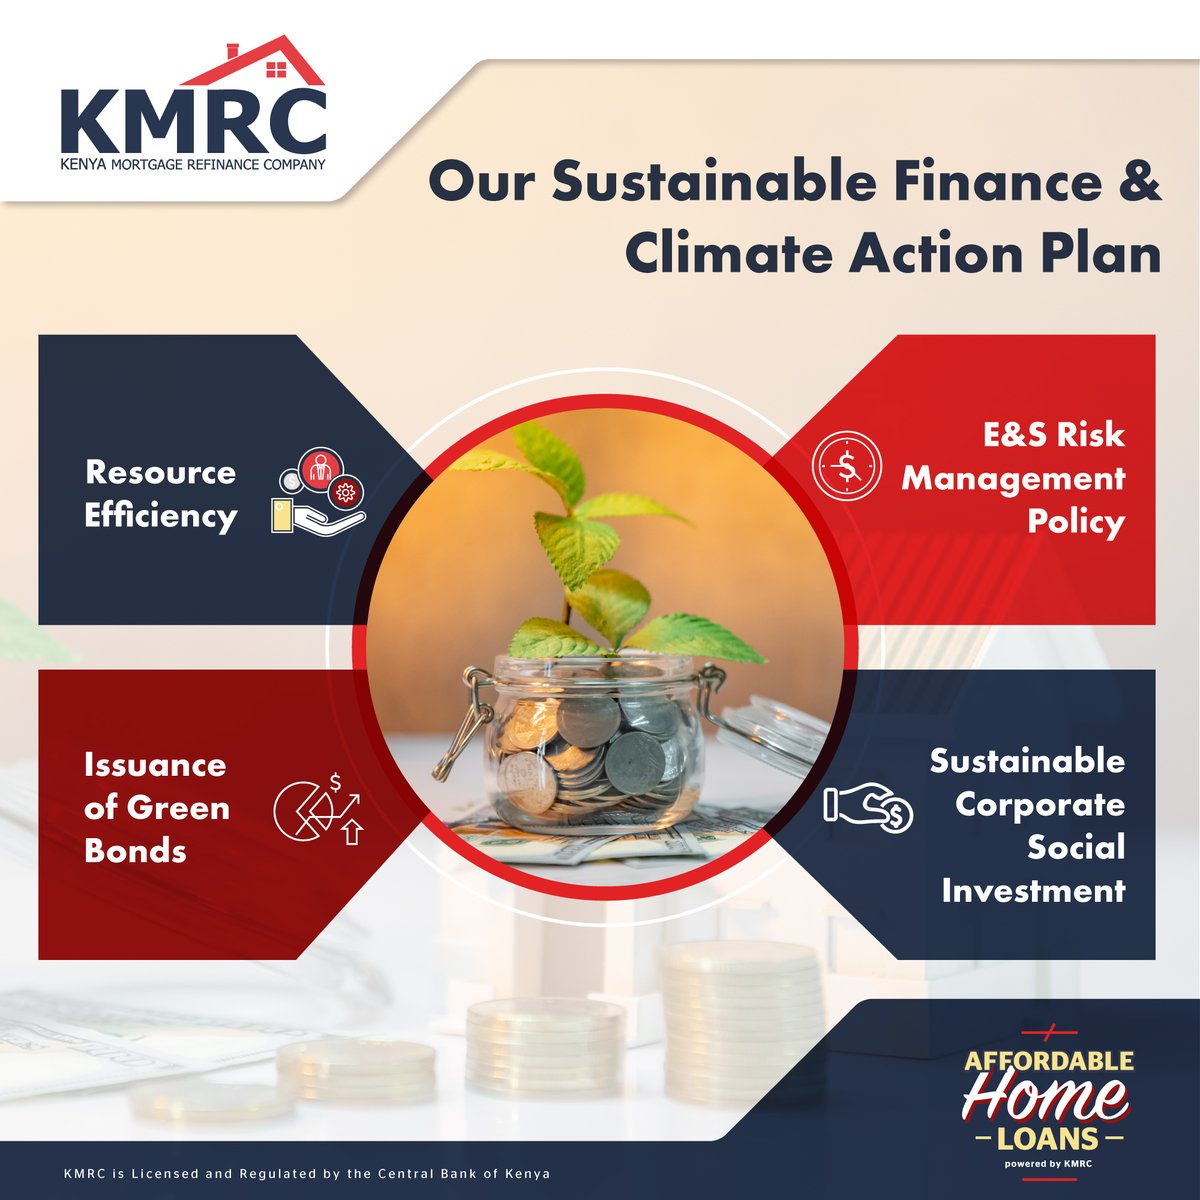 Did you know that @kmrc_co has embedded #sustainability in its #StrategicPlan?We’re on track to becoming #sustainability trailblazers in #Affordablehousing. Here are some of our implemented & pipelineinitiatives.Join in creating a greener housing market #SustainableHousing #SDG11